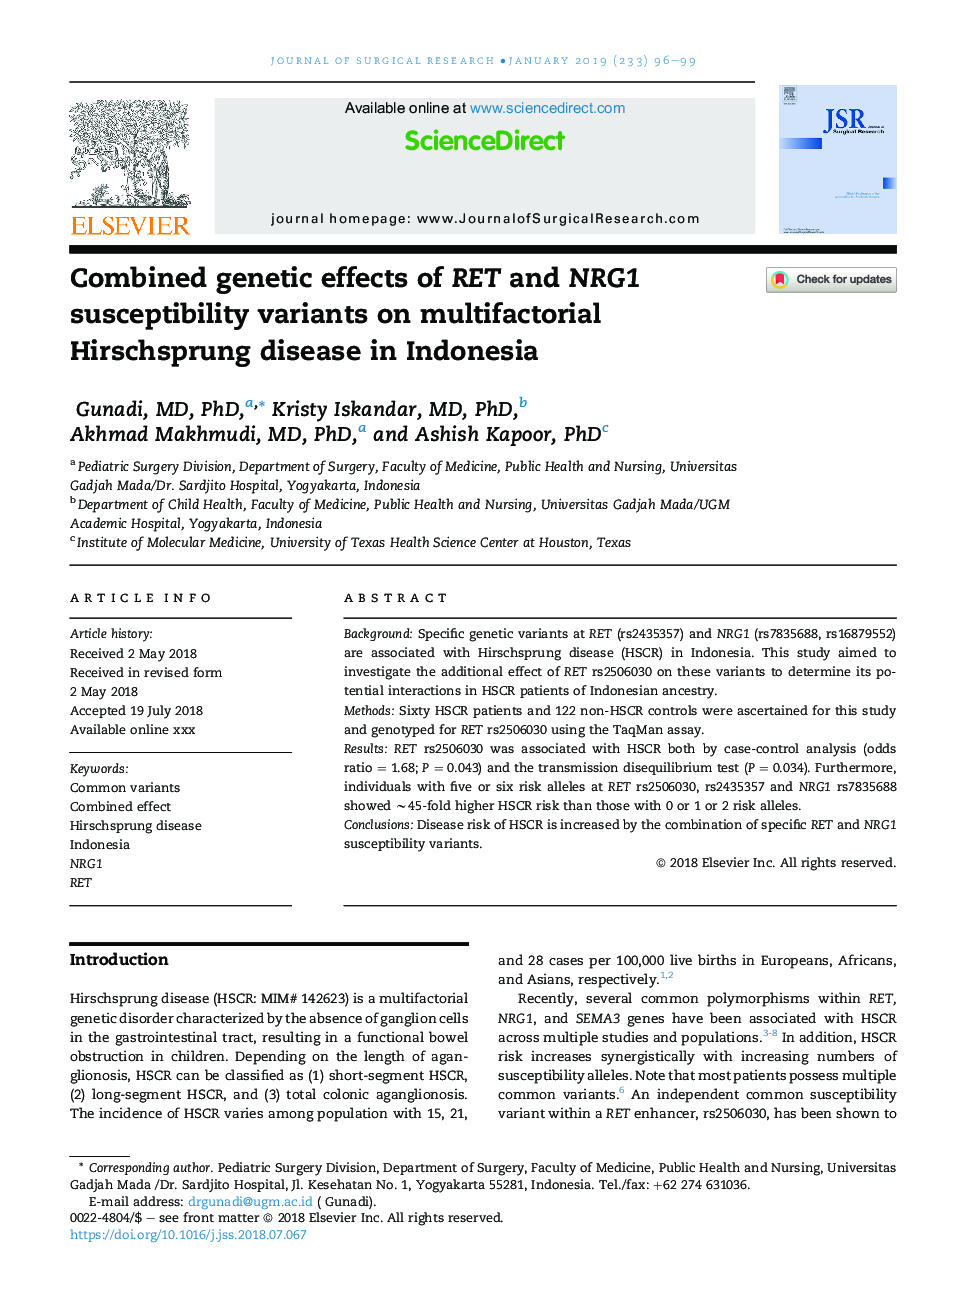 Combined genetic effects of RET and NRG1 susceptibility variants on multifactorial Hirschsprung disease in Indonesia